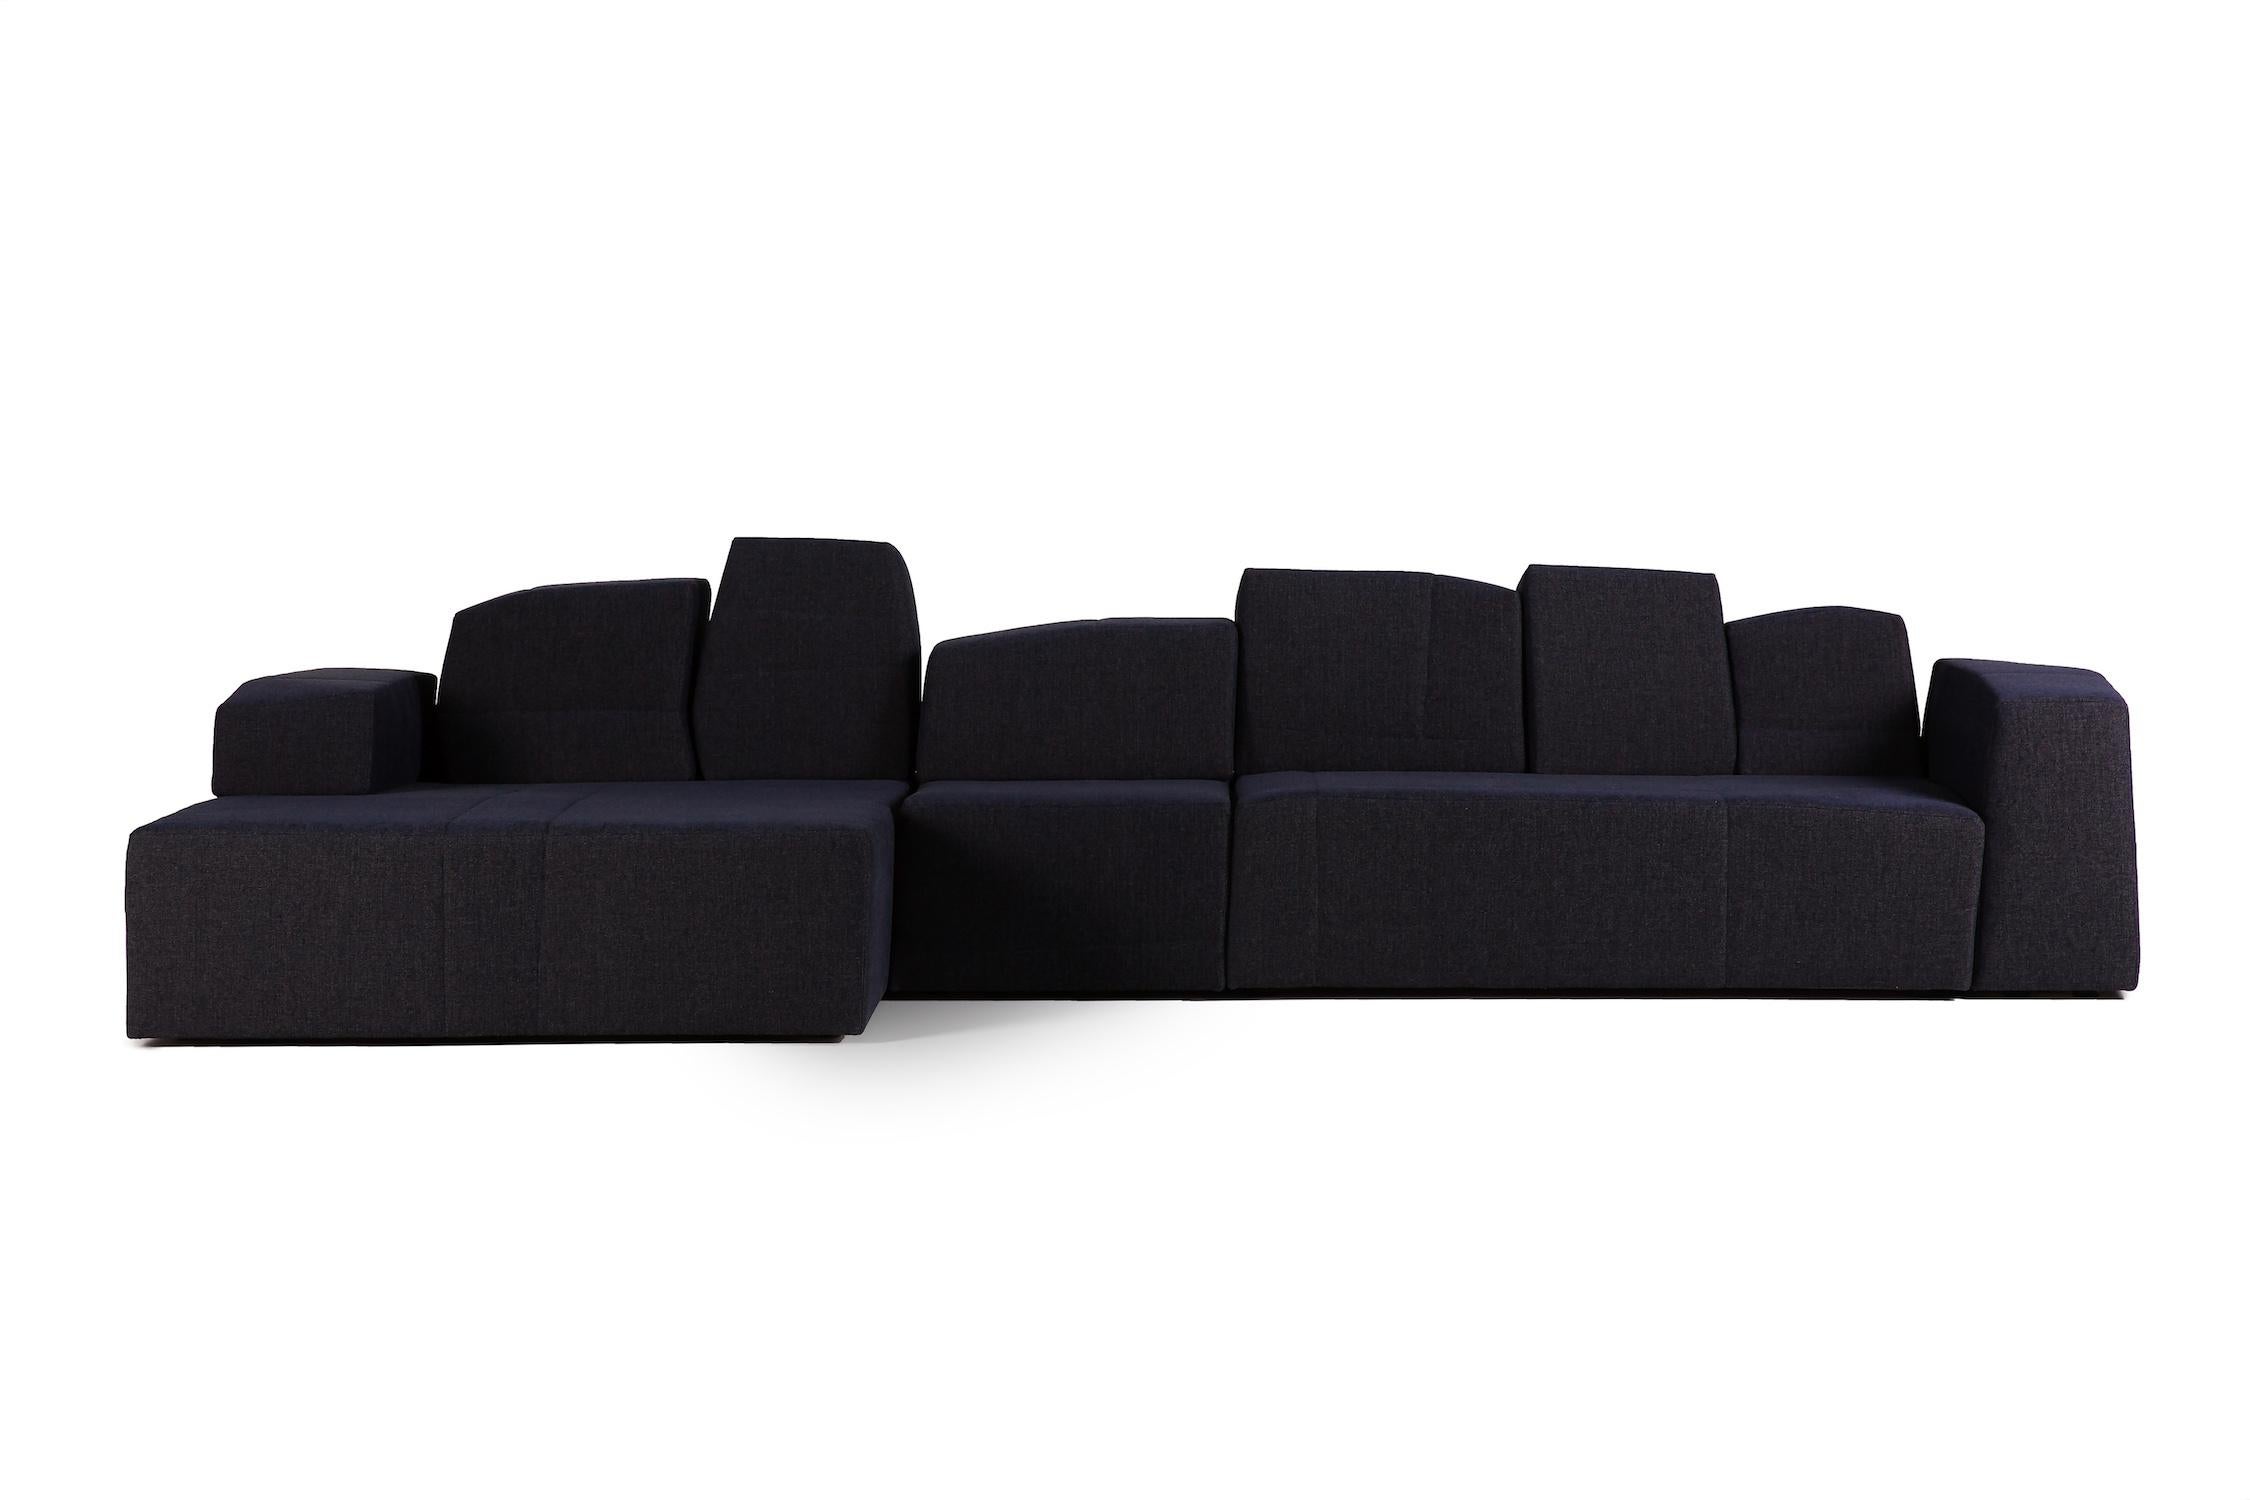 The Something Like This Sofa is a celebration of the designer’s love for sketchy drawings translated into a soft, unusually modeled sofa.

Something Like This can be configured in a multitude of ways from a standard straight sofa, sectional sofa